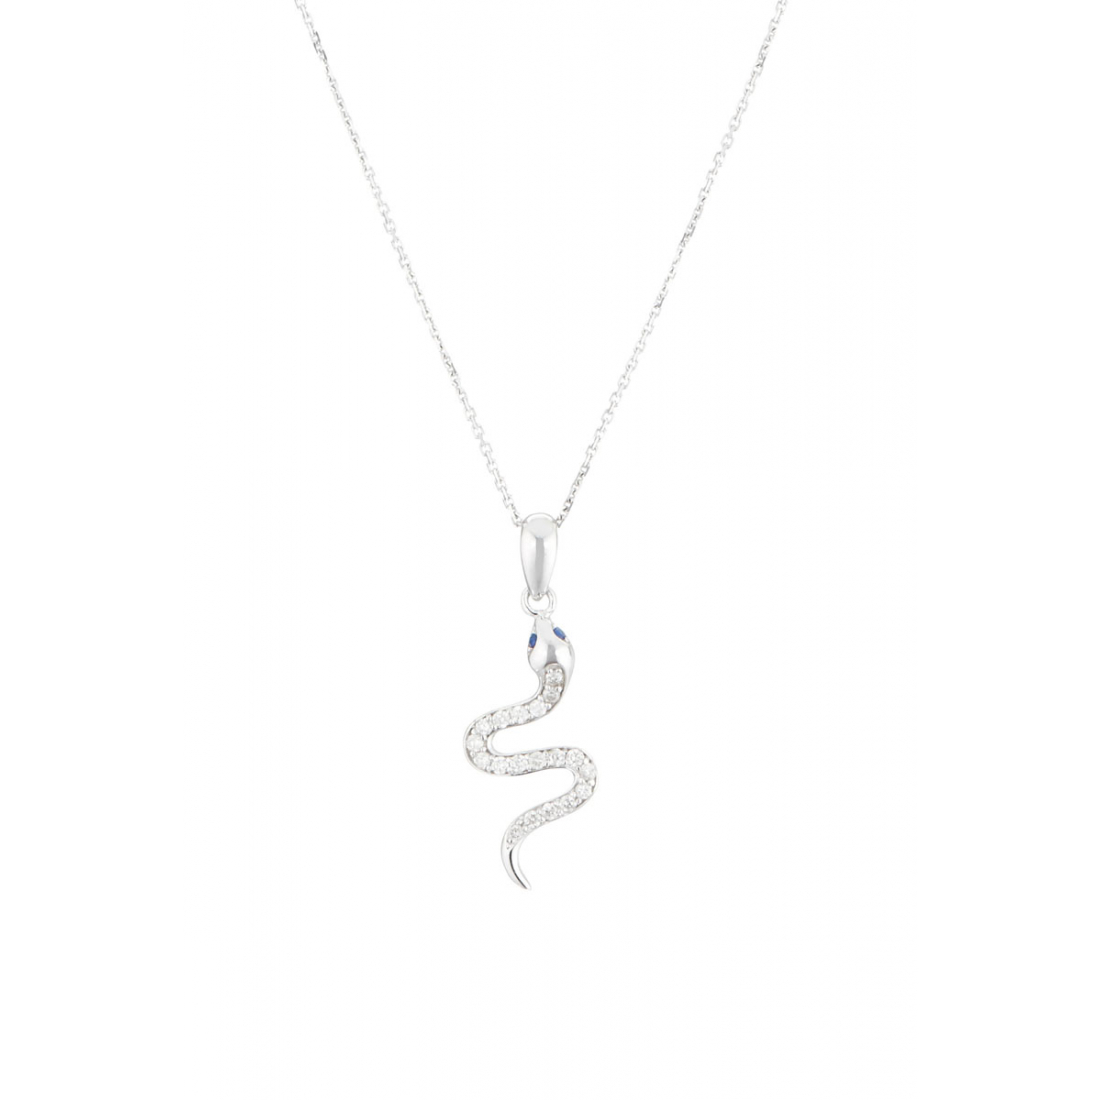 Women's 'Saly' Pendant with chain